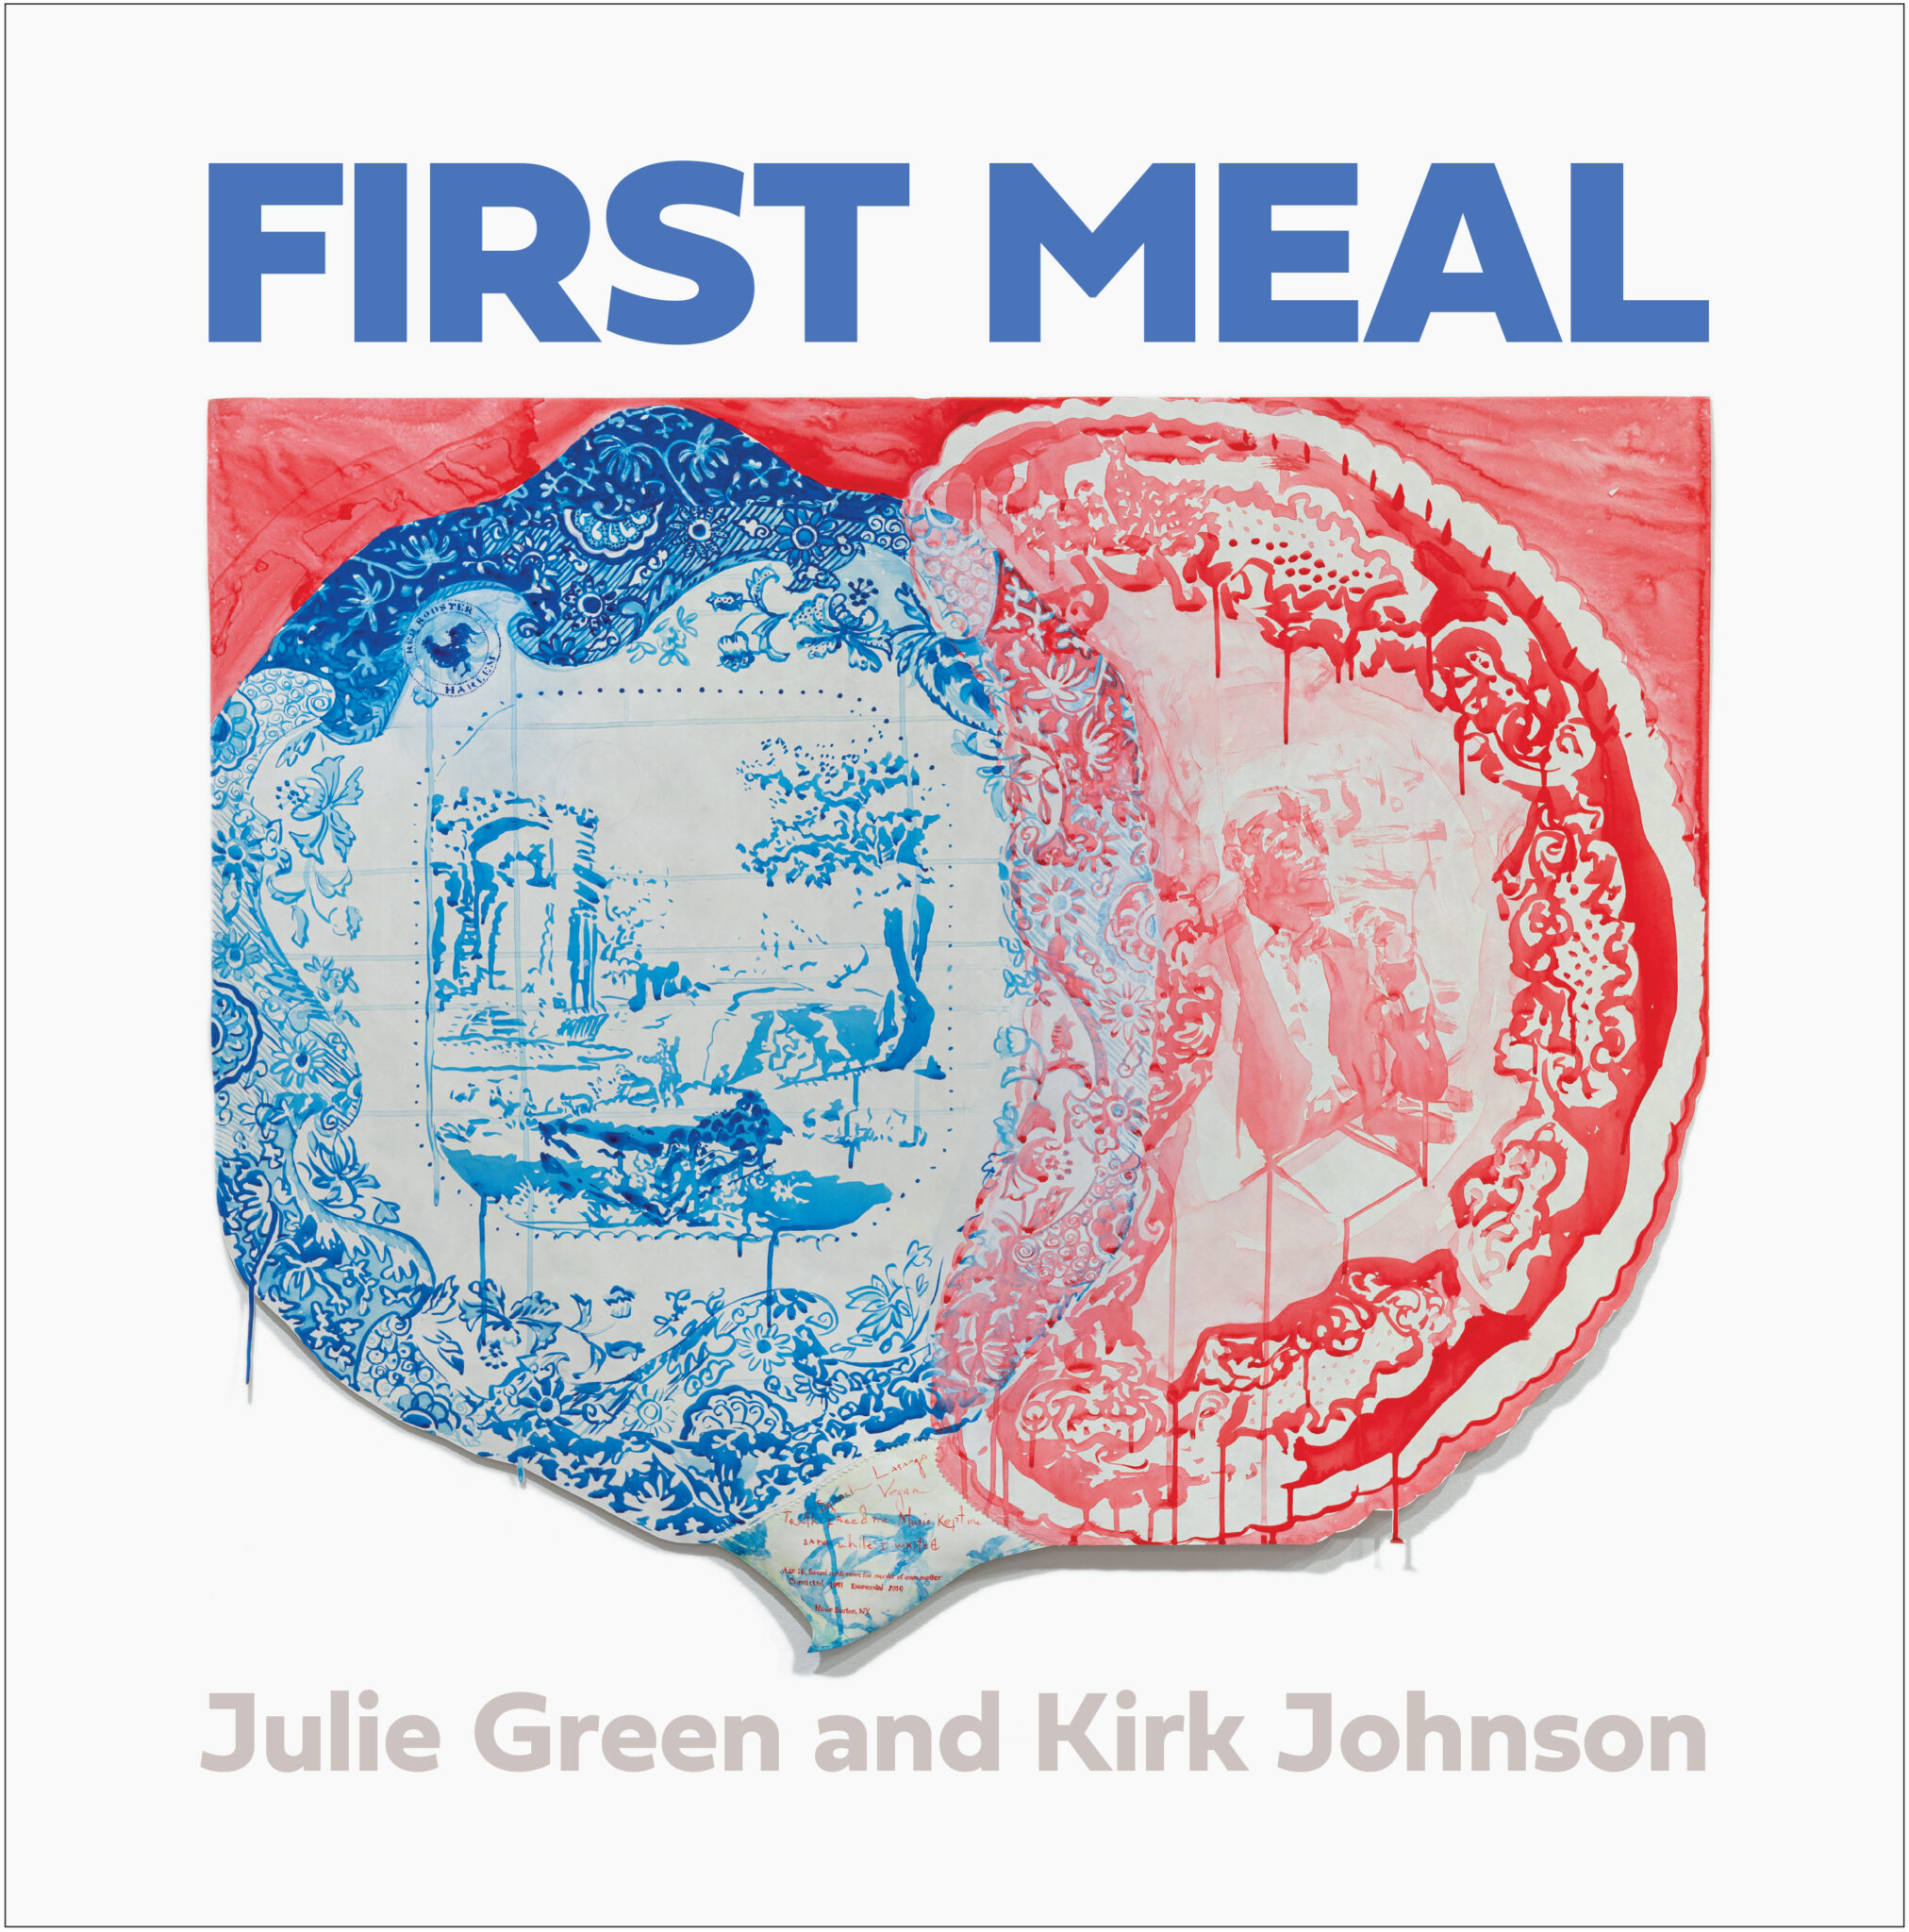 First meal by Julie Green and Kirk Johnson. Blue and red lace banner in a calico design